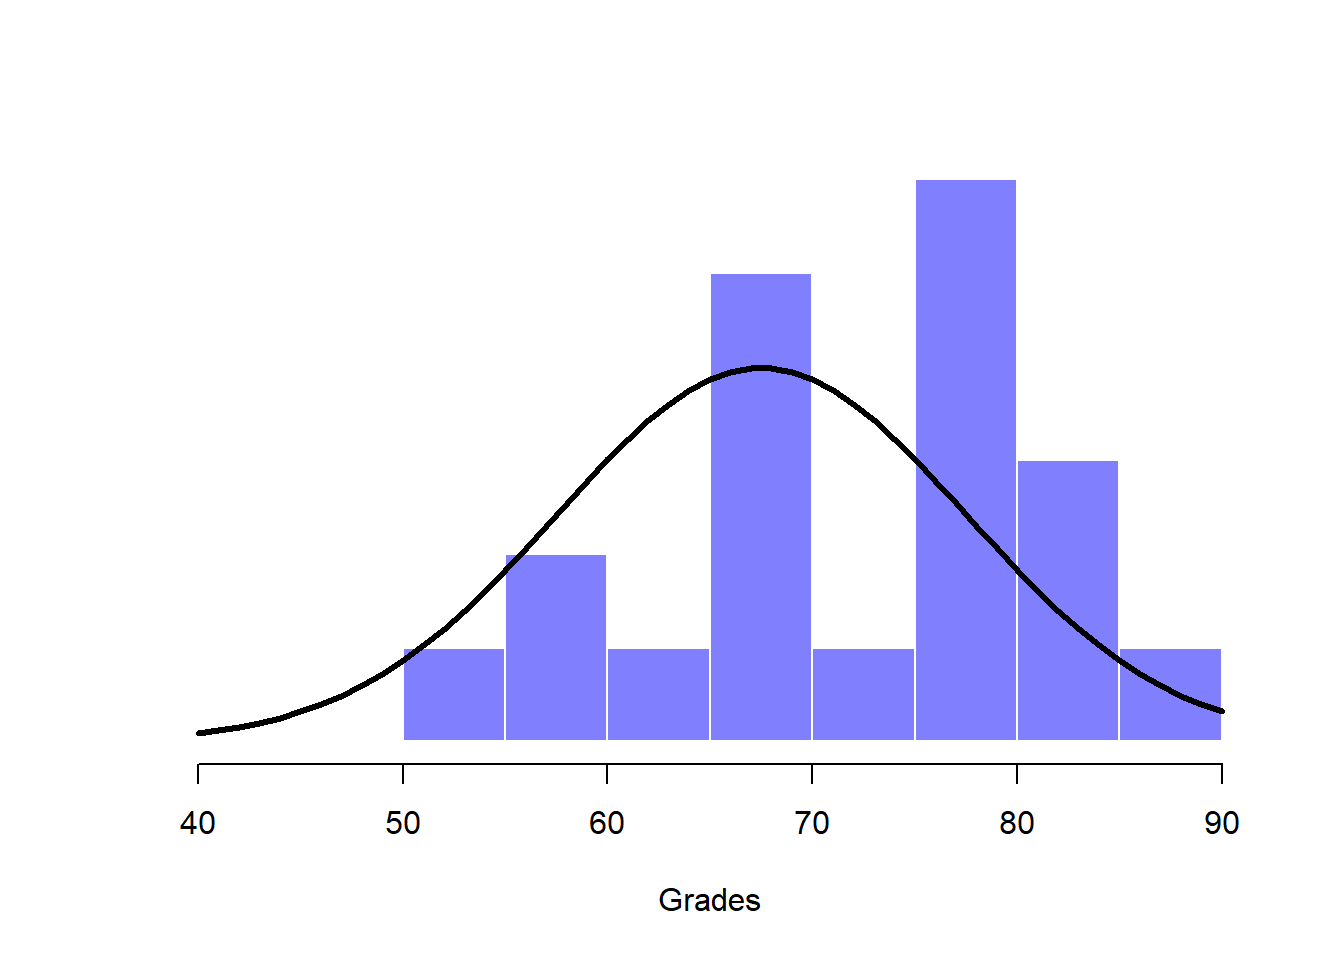 The theoretical distribution (solid line) from which the psychology student grades (grey bars) are supposed to have been generated.